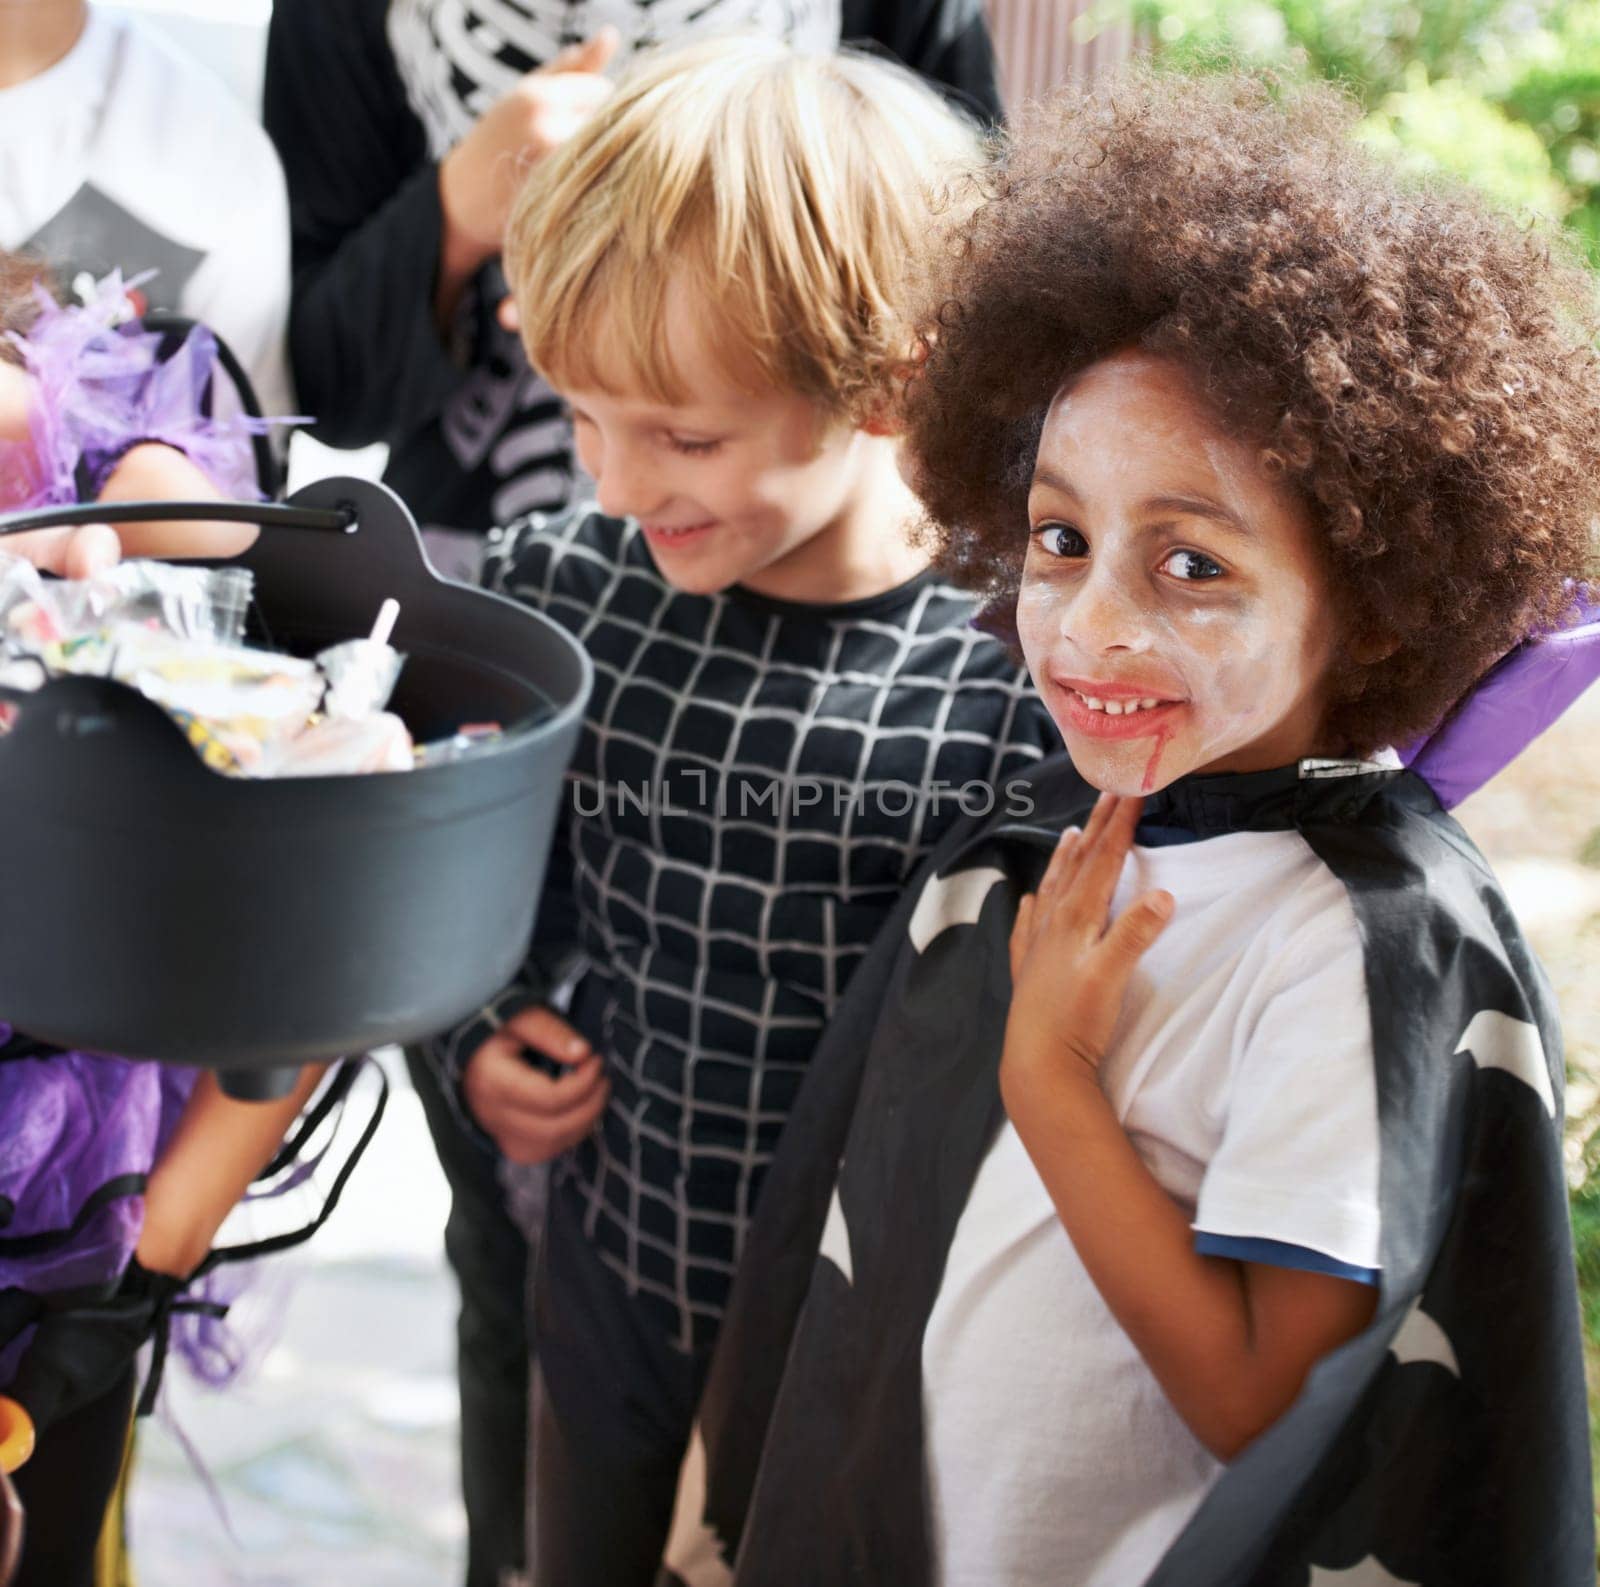 So much candy. Little children trick-or-treating on halloween